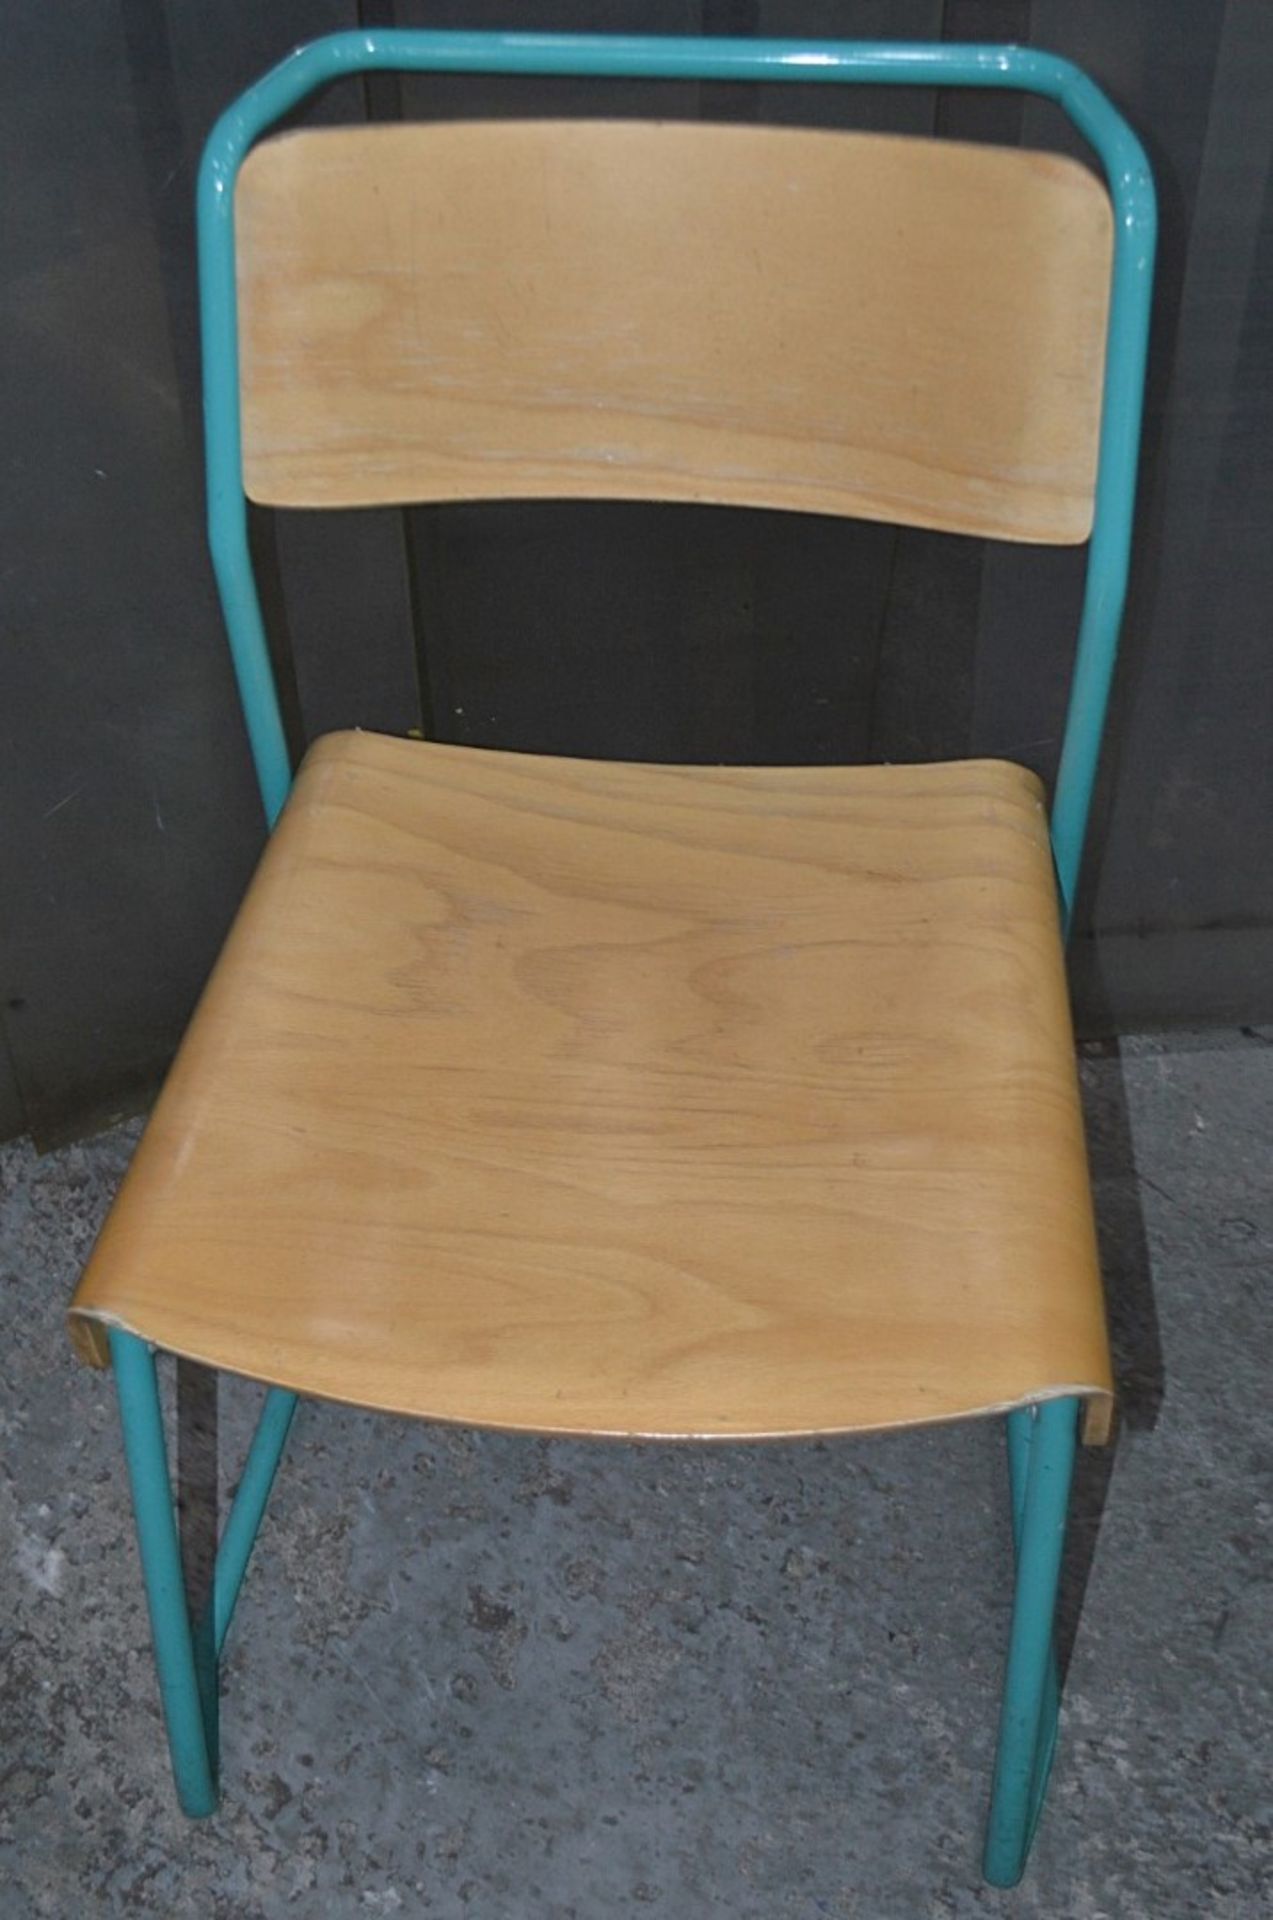 6 x Contemporary Stackable Bistro / Bar Chairs With Metal Frames With Curved Vanished Wooden Seats - Image 7 of 12